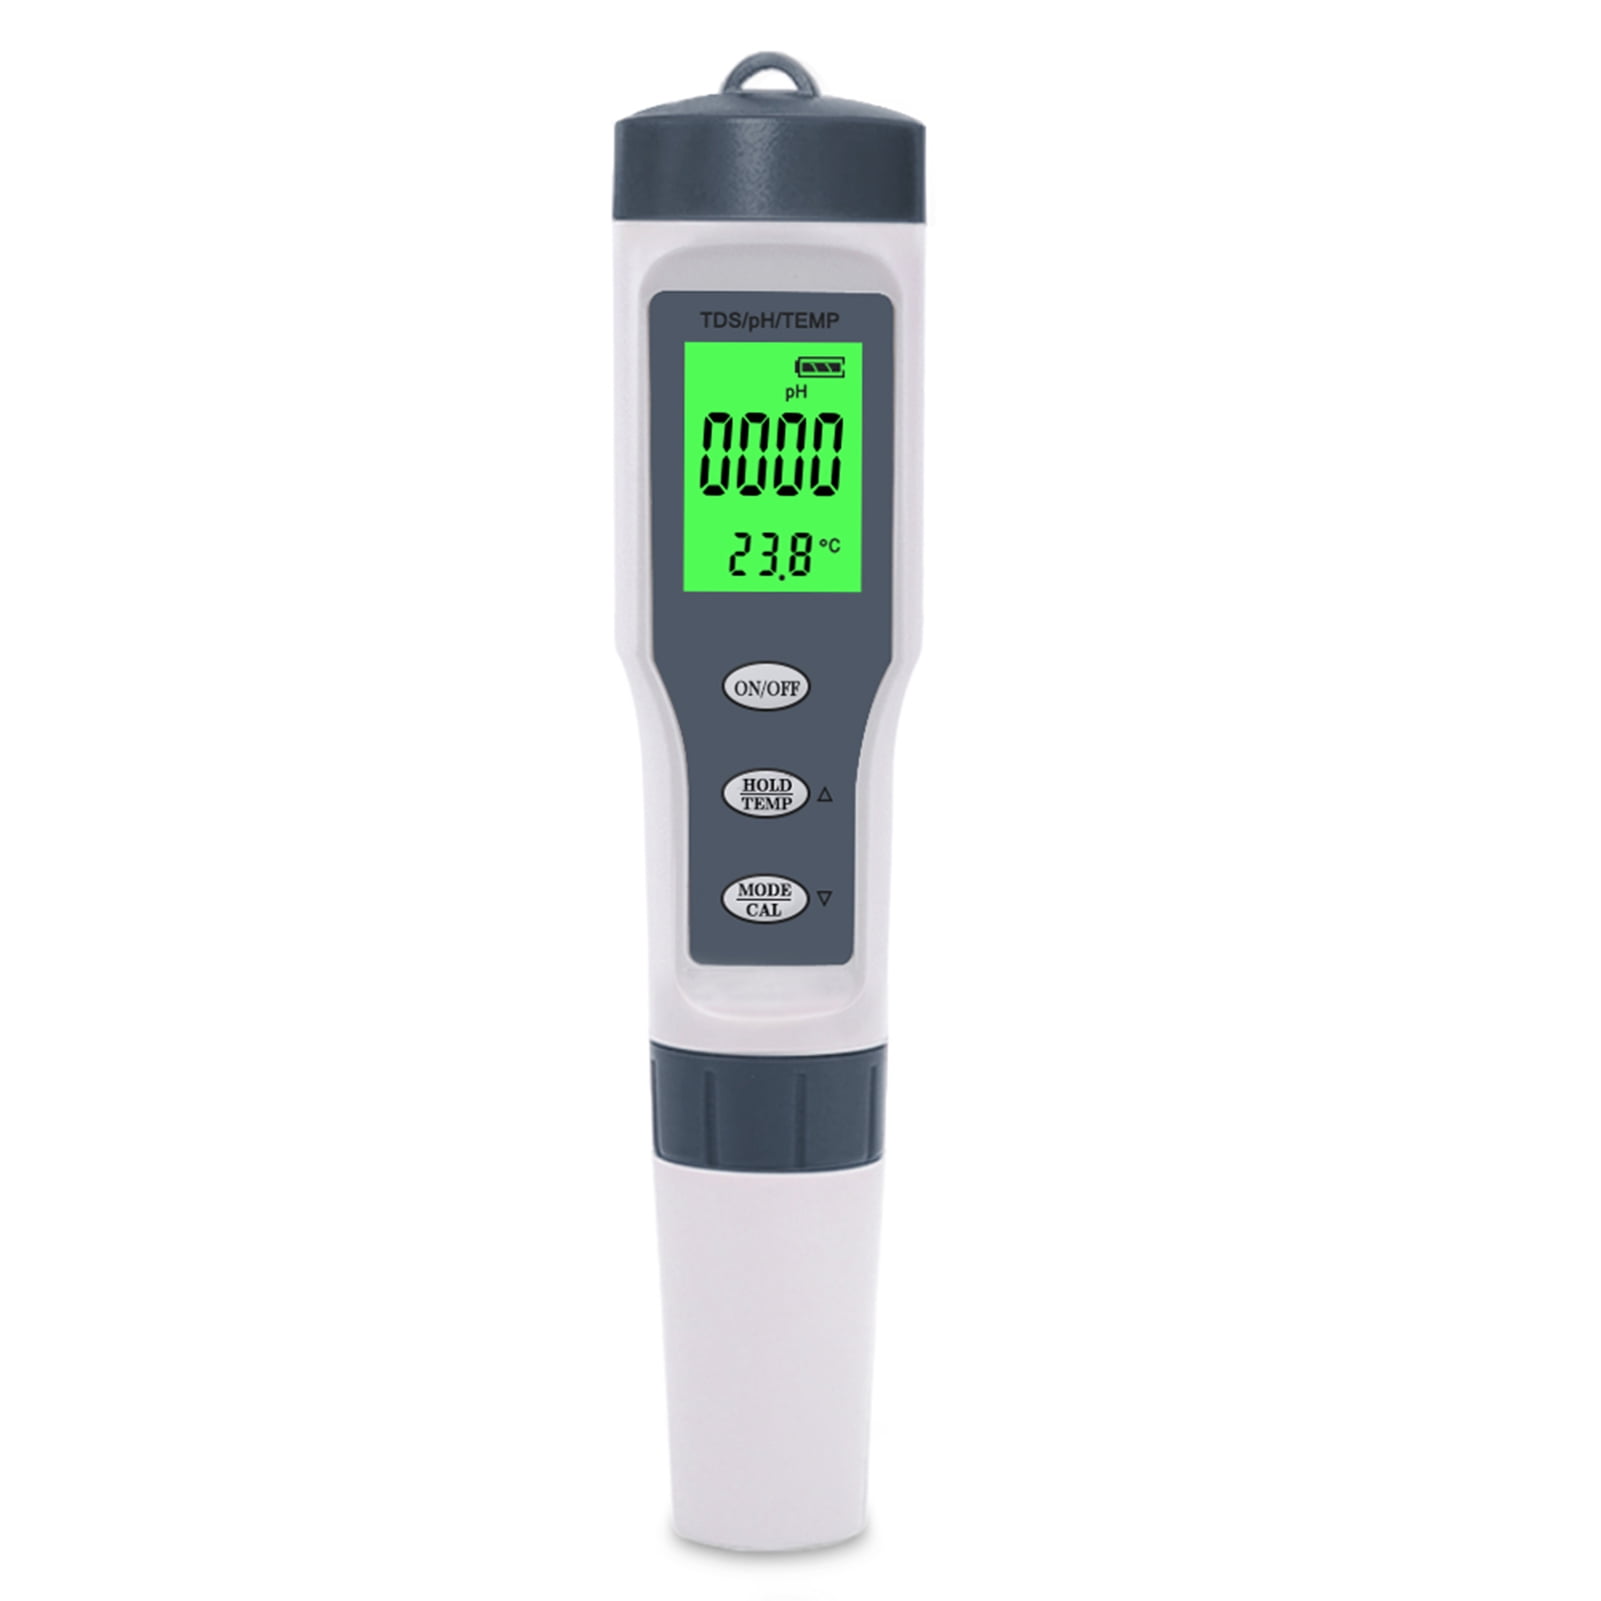 Explopur Meter 3-in-1 Digital Tester Pen with PH Temperature Measurement High Accuracy 1-19999ppm & 0-14 PH Range Pocket Size for Household Drinking Pool Aquarium 